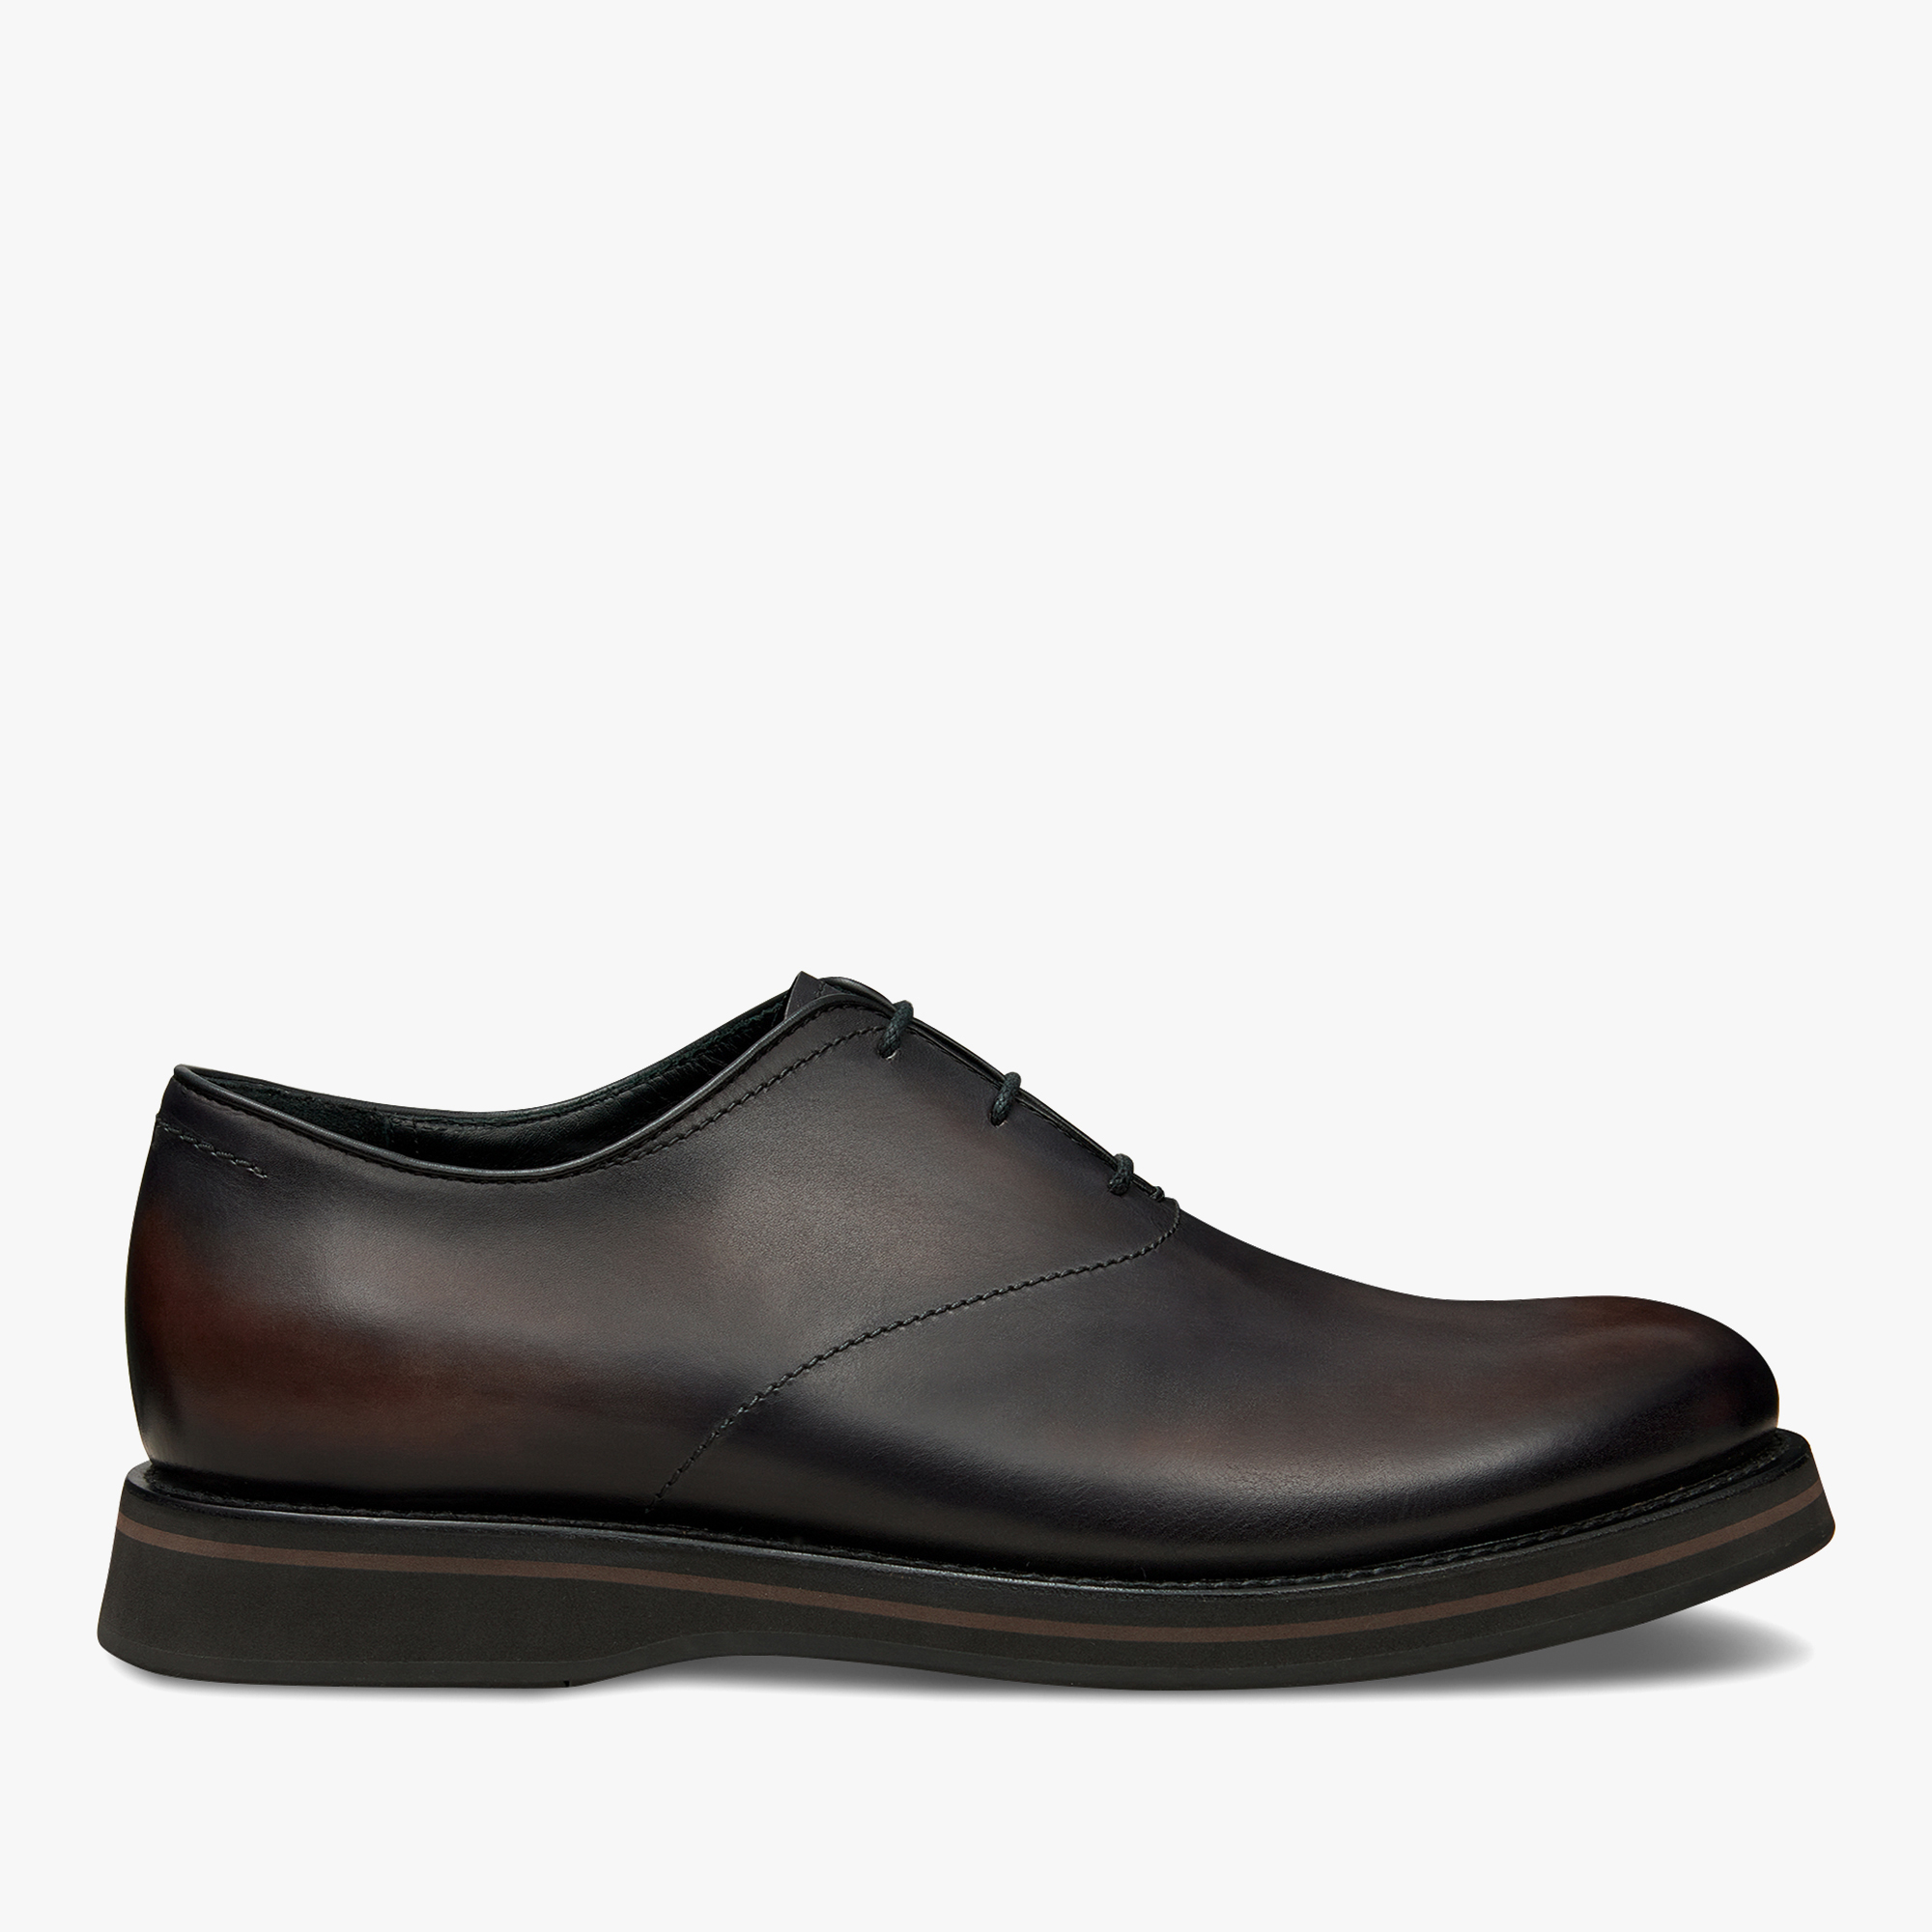 Alessio Leather Oxford, CHARCOAL BROWN, hi-res